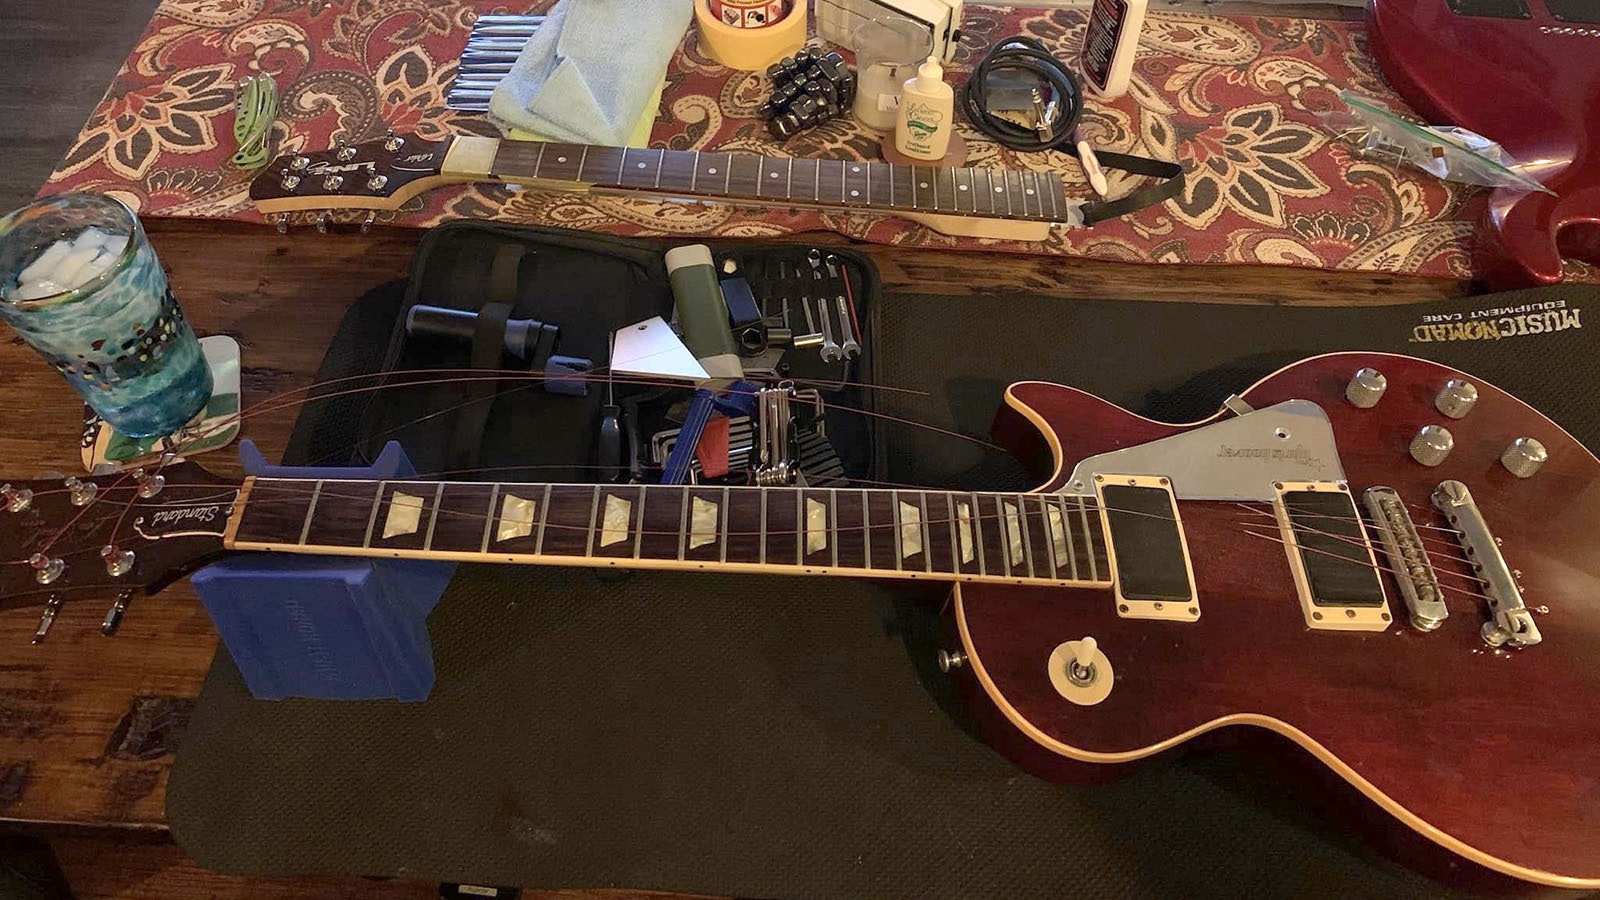 A close-up of the 1977 Gibson Les Paul that was stolen from Cheyenne musician Chris Hoover.